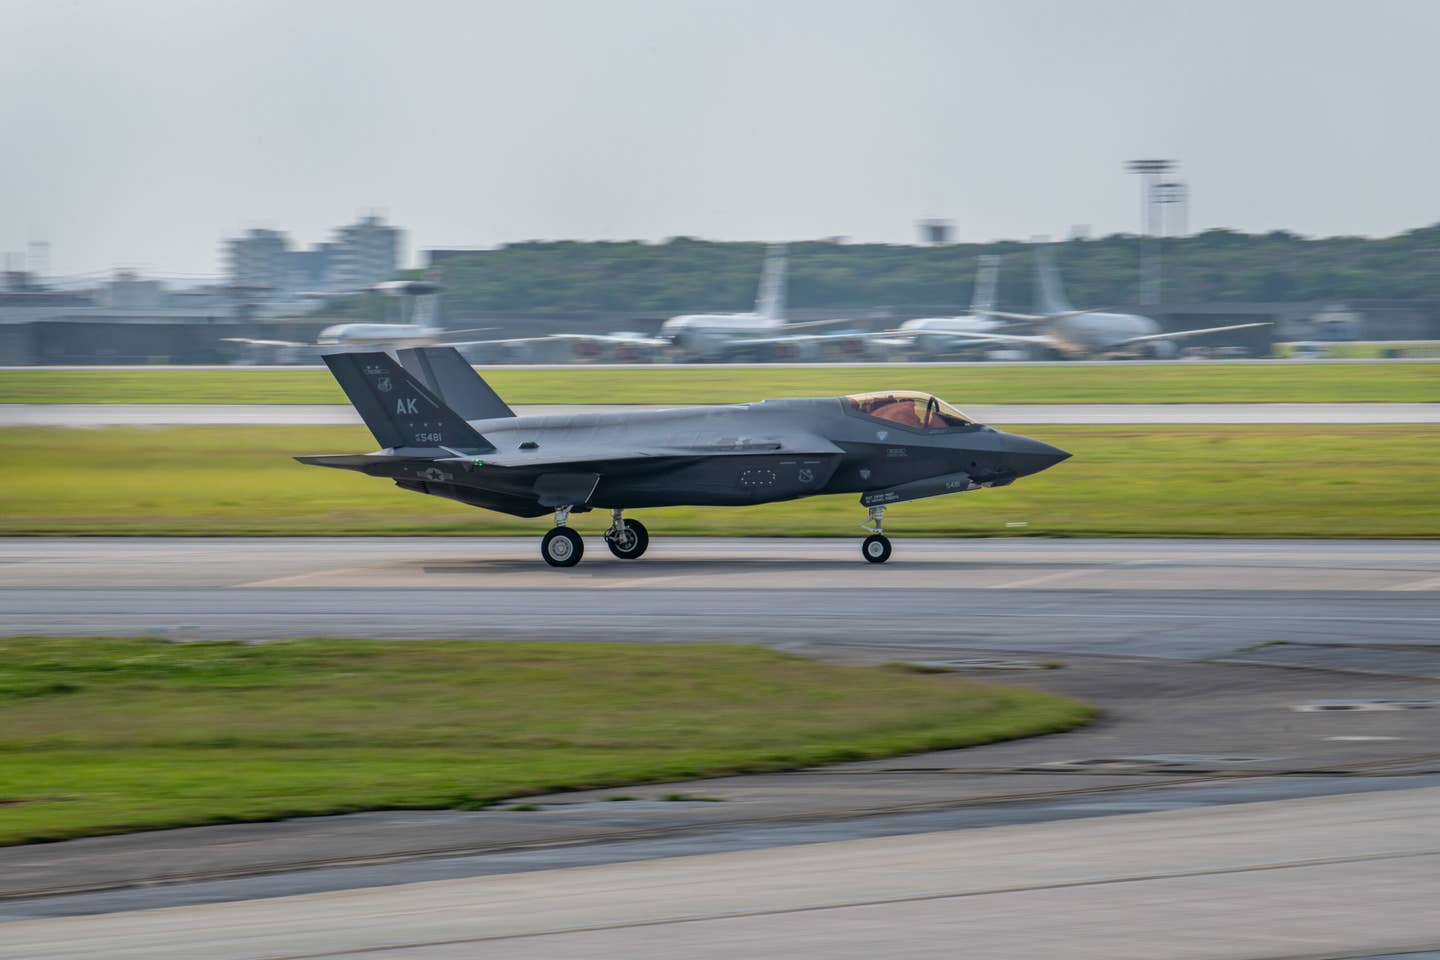 A U.S. Air Force F-35A assigned to the 354th Fighter Wing at Eilson Air Force Base, Alaska, lands at Kadena Air Base, Japan, on March 28, 2023, for a rotational deployment. <em>U.S. Air Force photo by Airman 1st Class Alexis Redin</em>